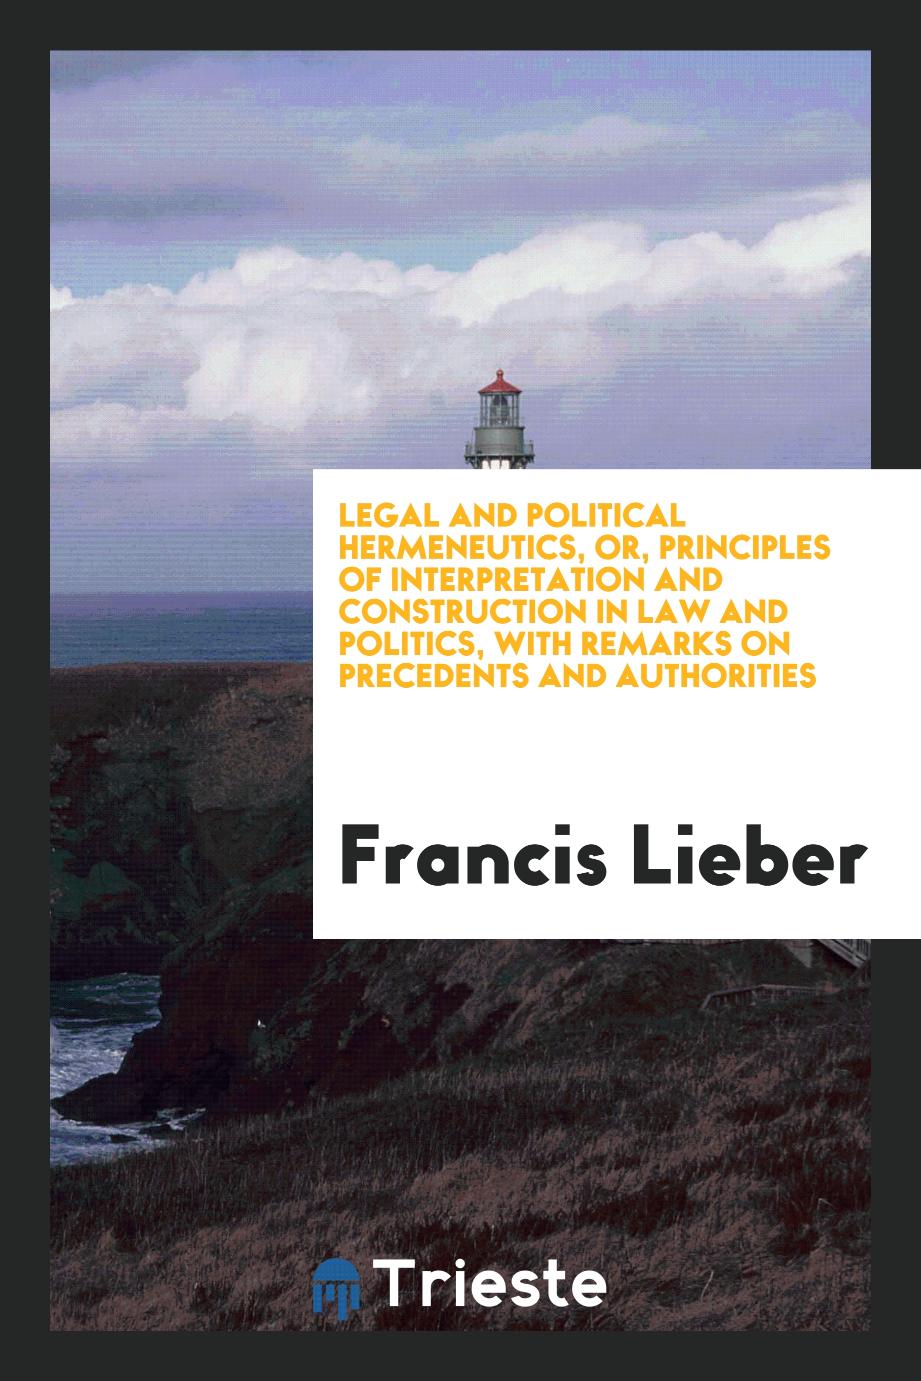 Legal and political hermeneutics, or, Principles of interpretation and construction in law and politics, with remarks on precedents and authorities